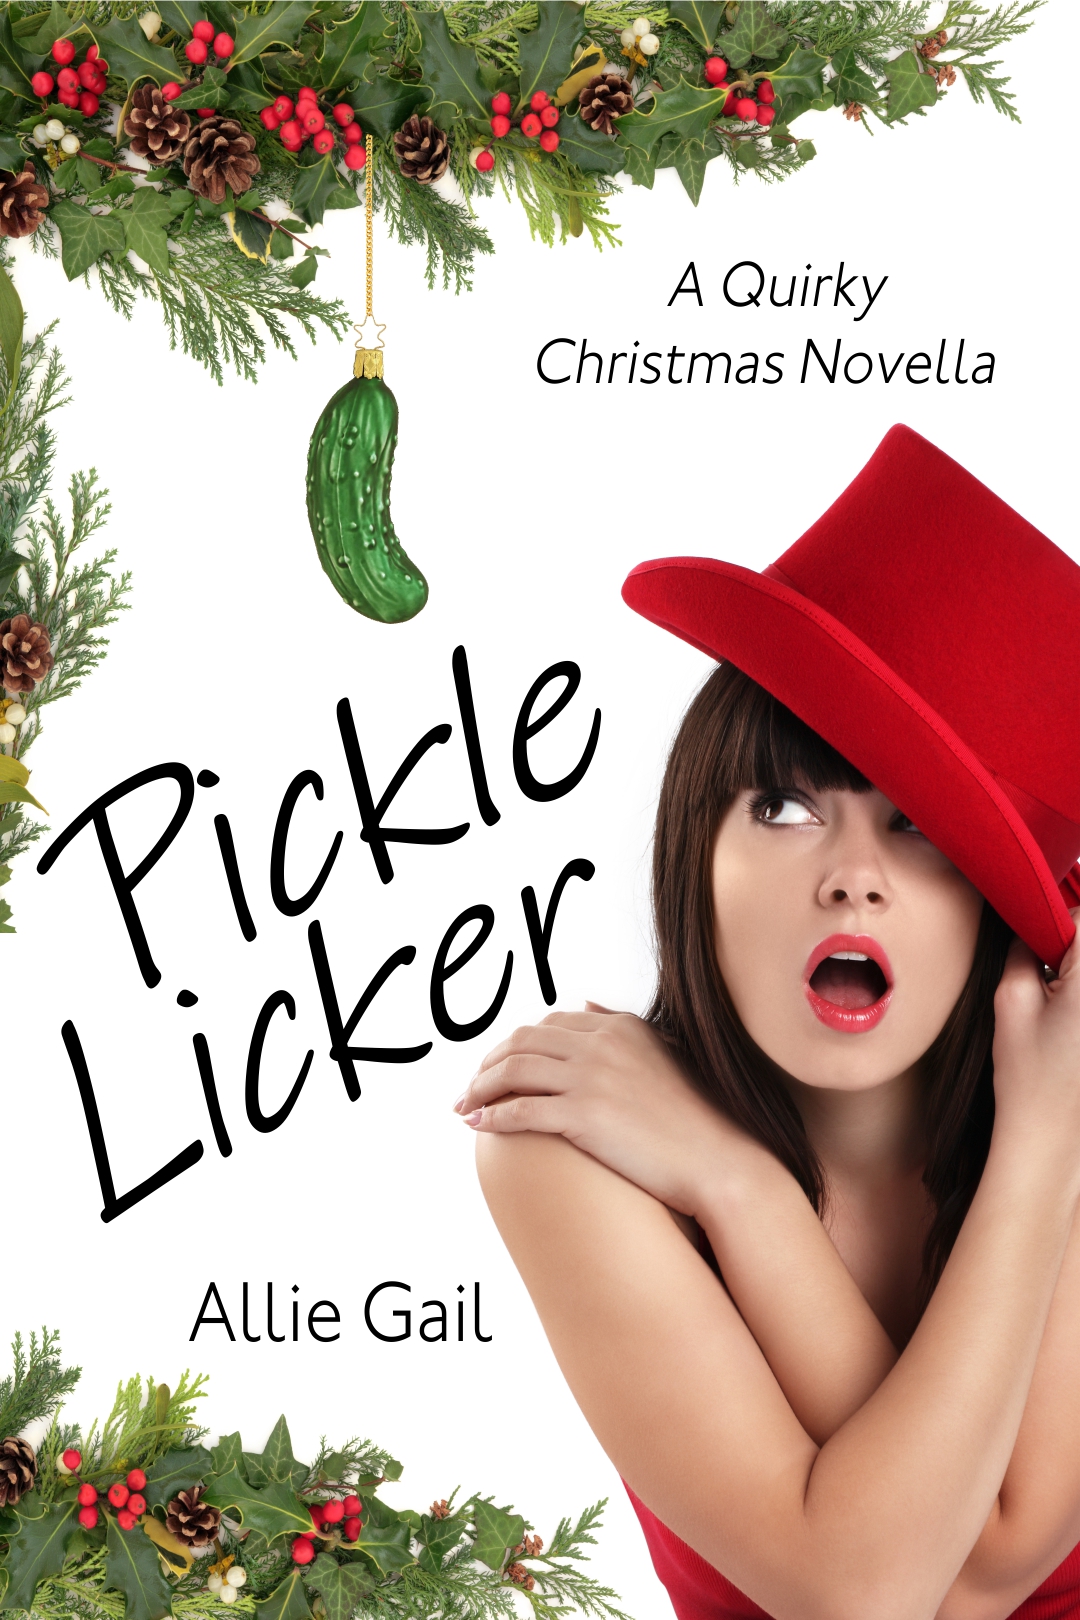 FREE: Pickle Licker: A Quirky Christmas Novella by Allie Gail